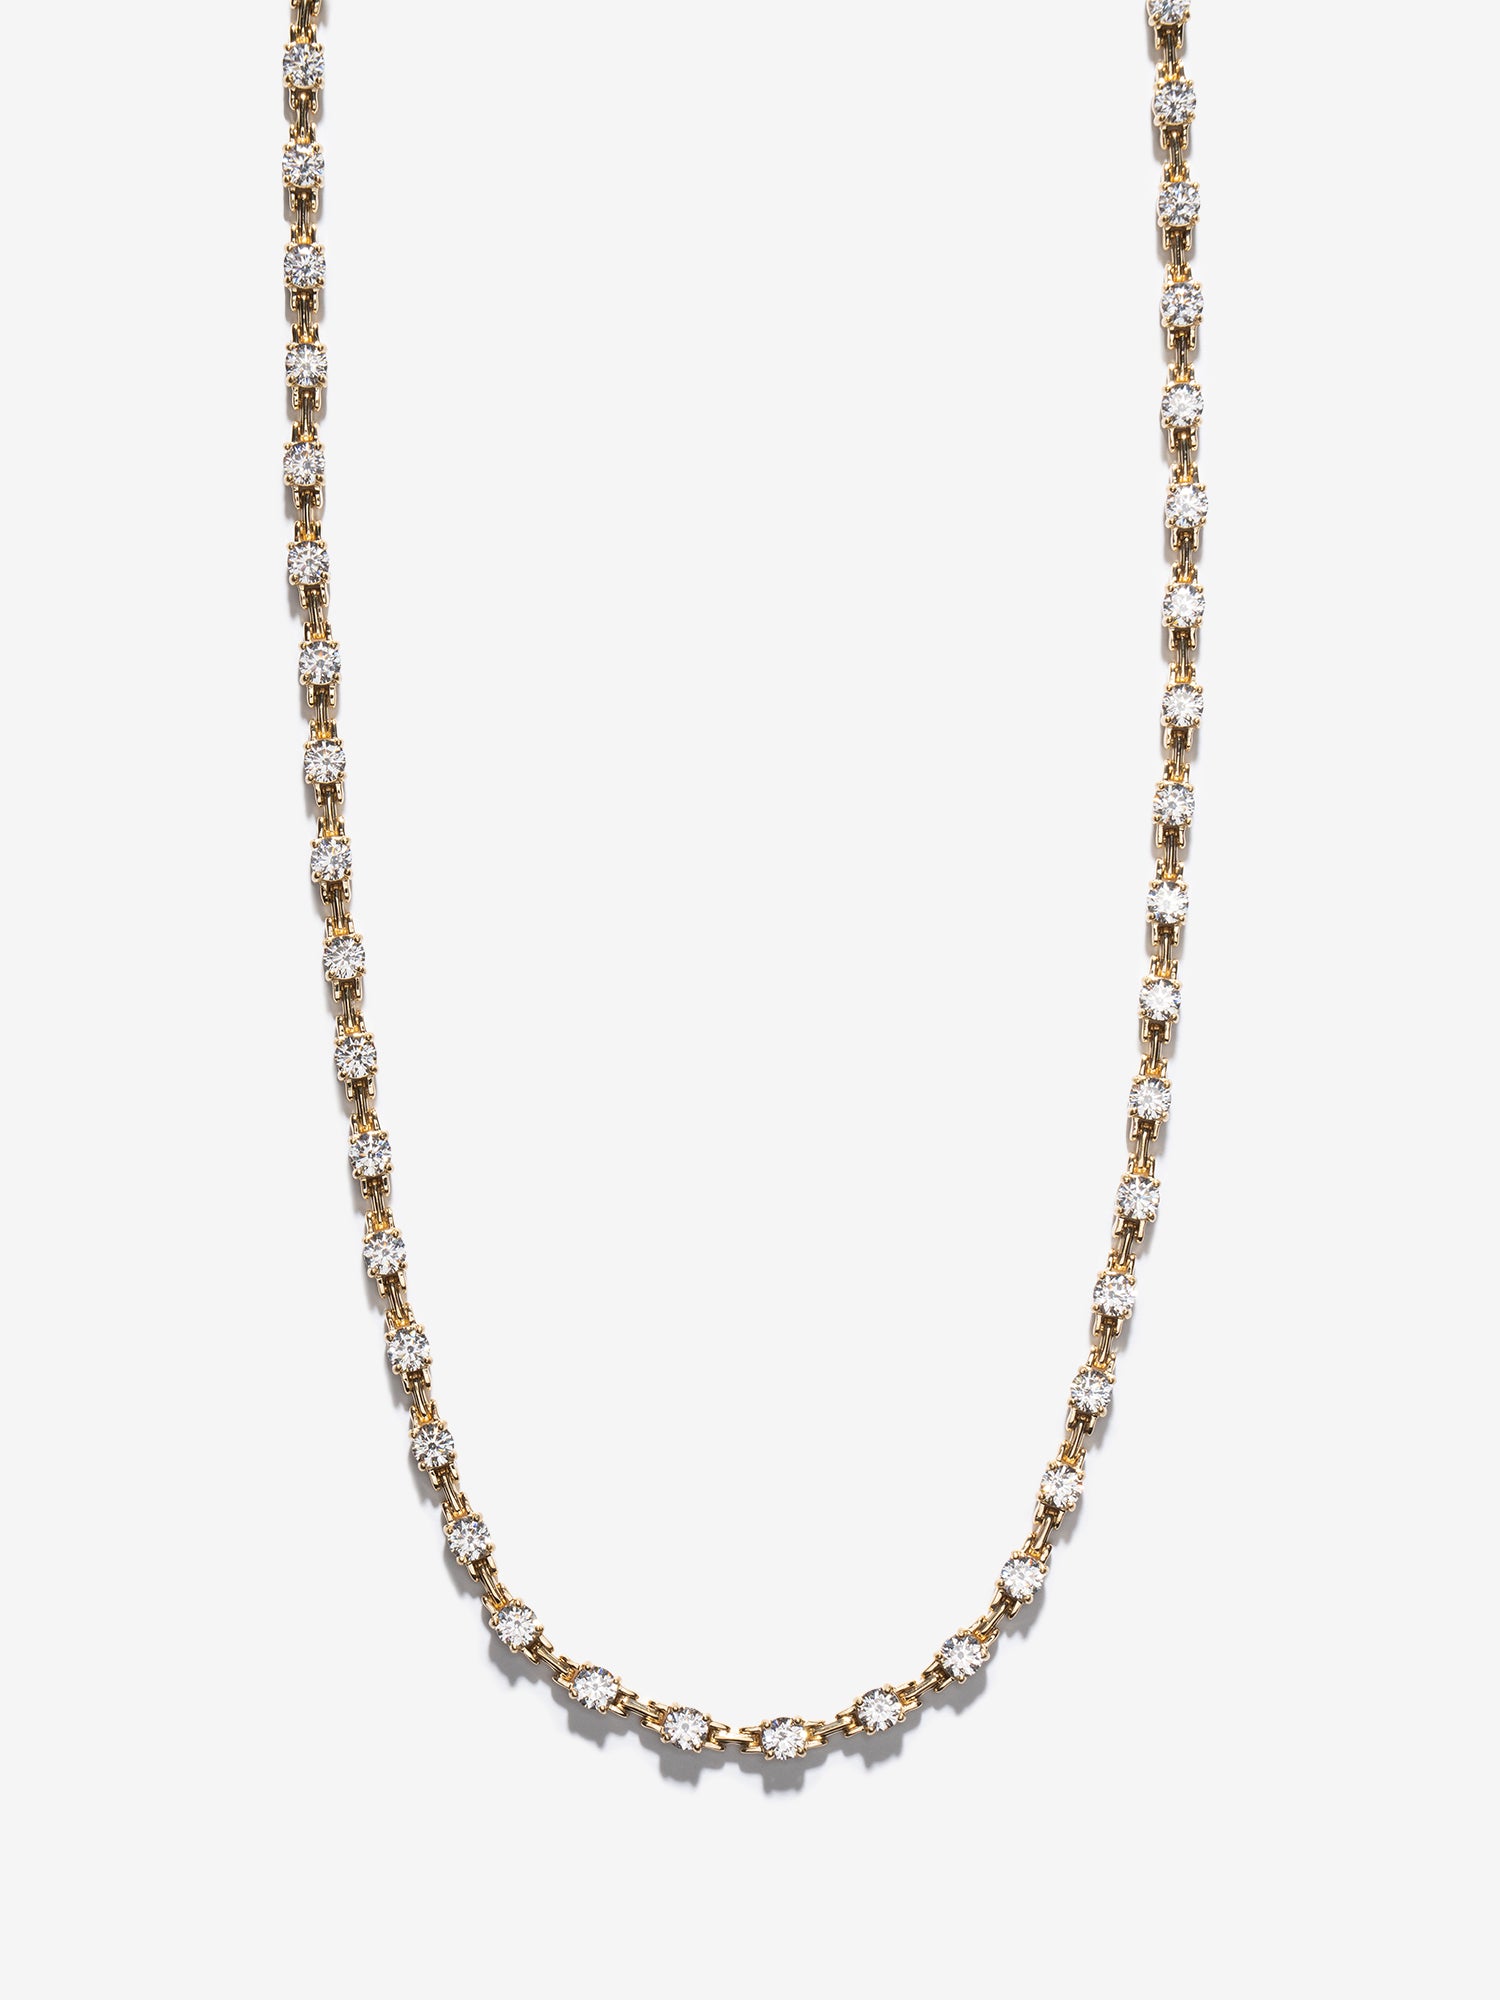 Pirouette Large All Over Diamond Necklace